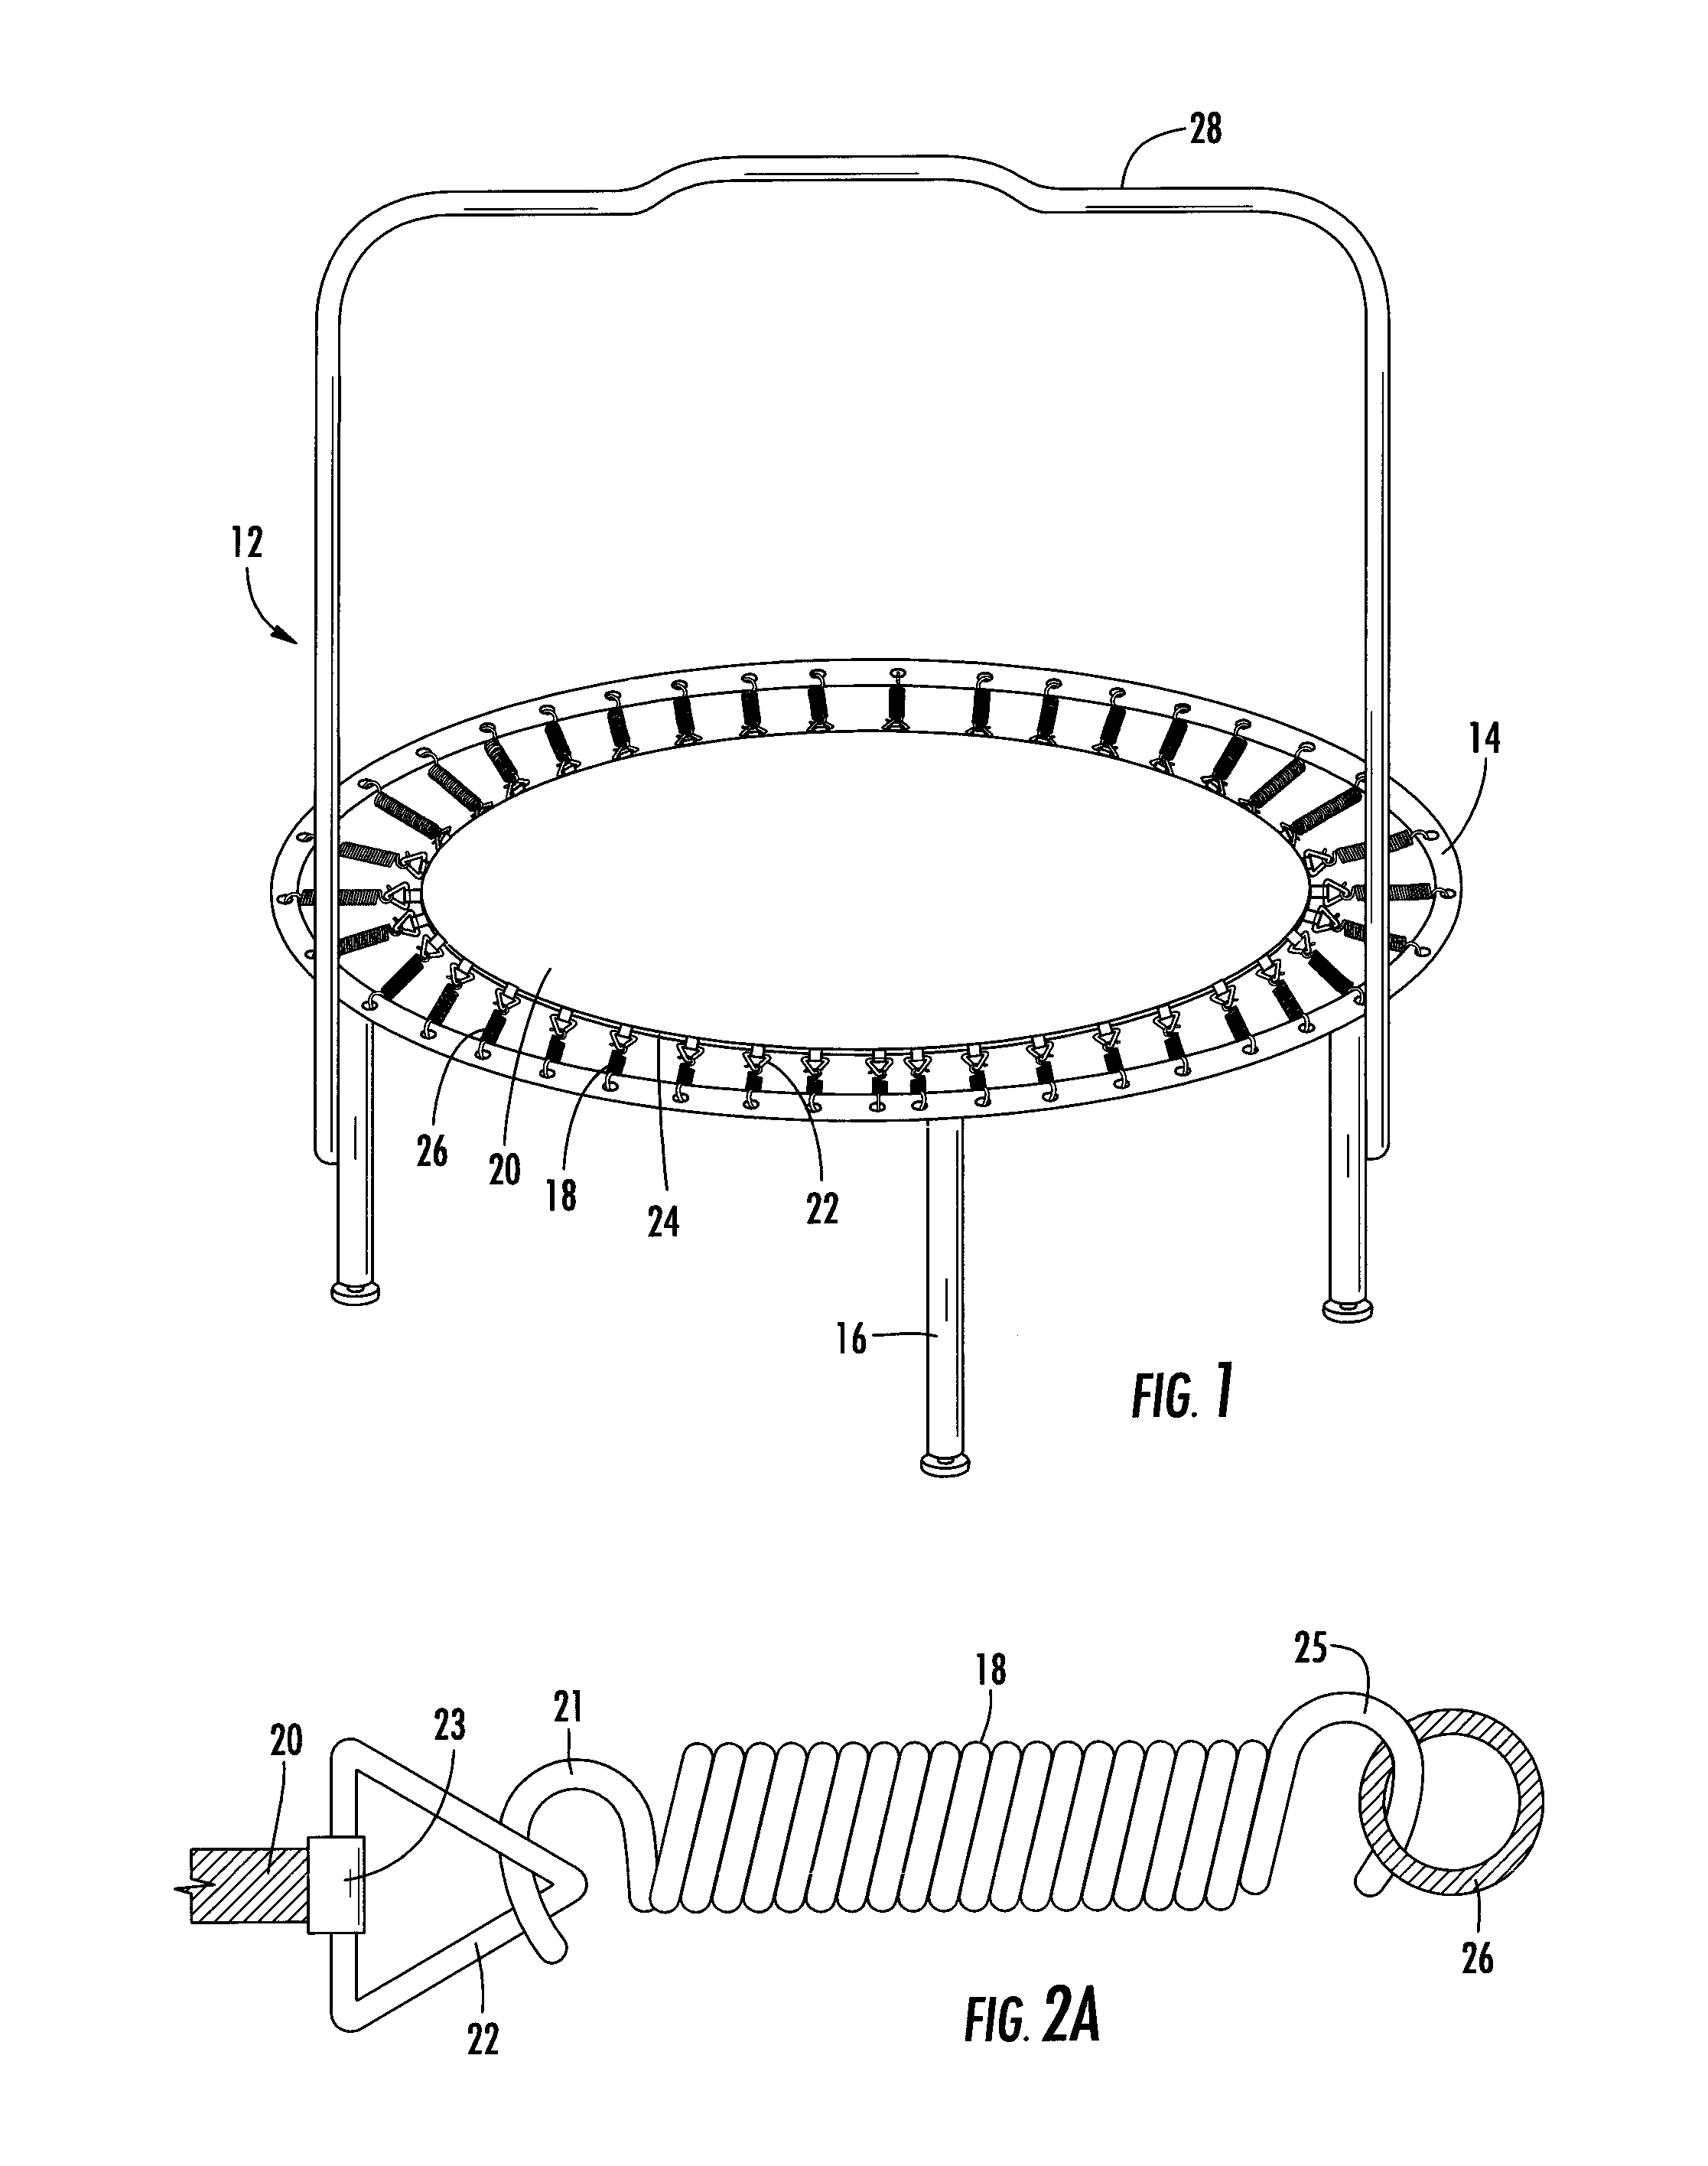 Decorative and safety assembly for dressing a trampoline